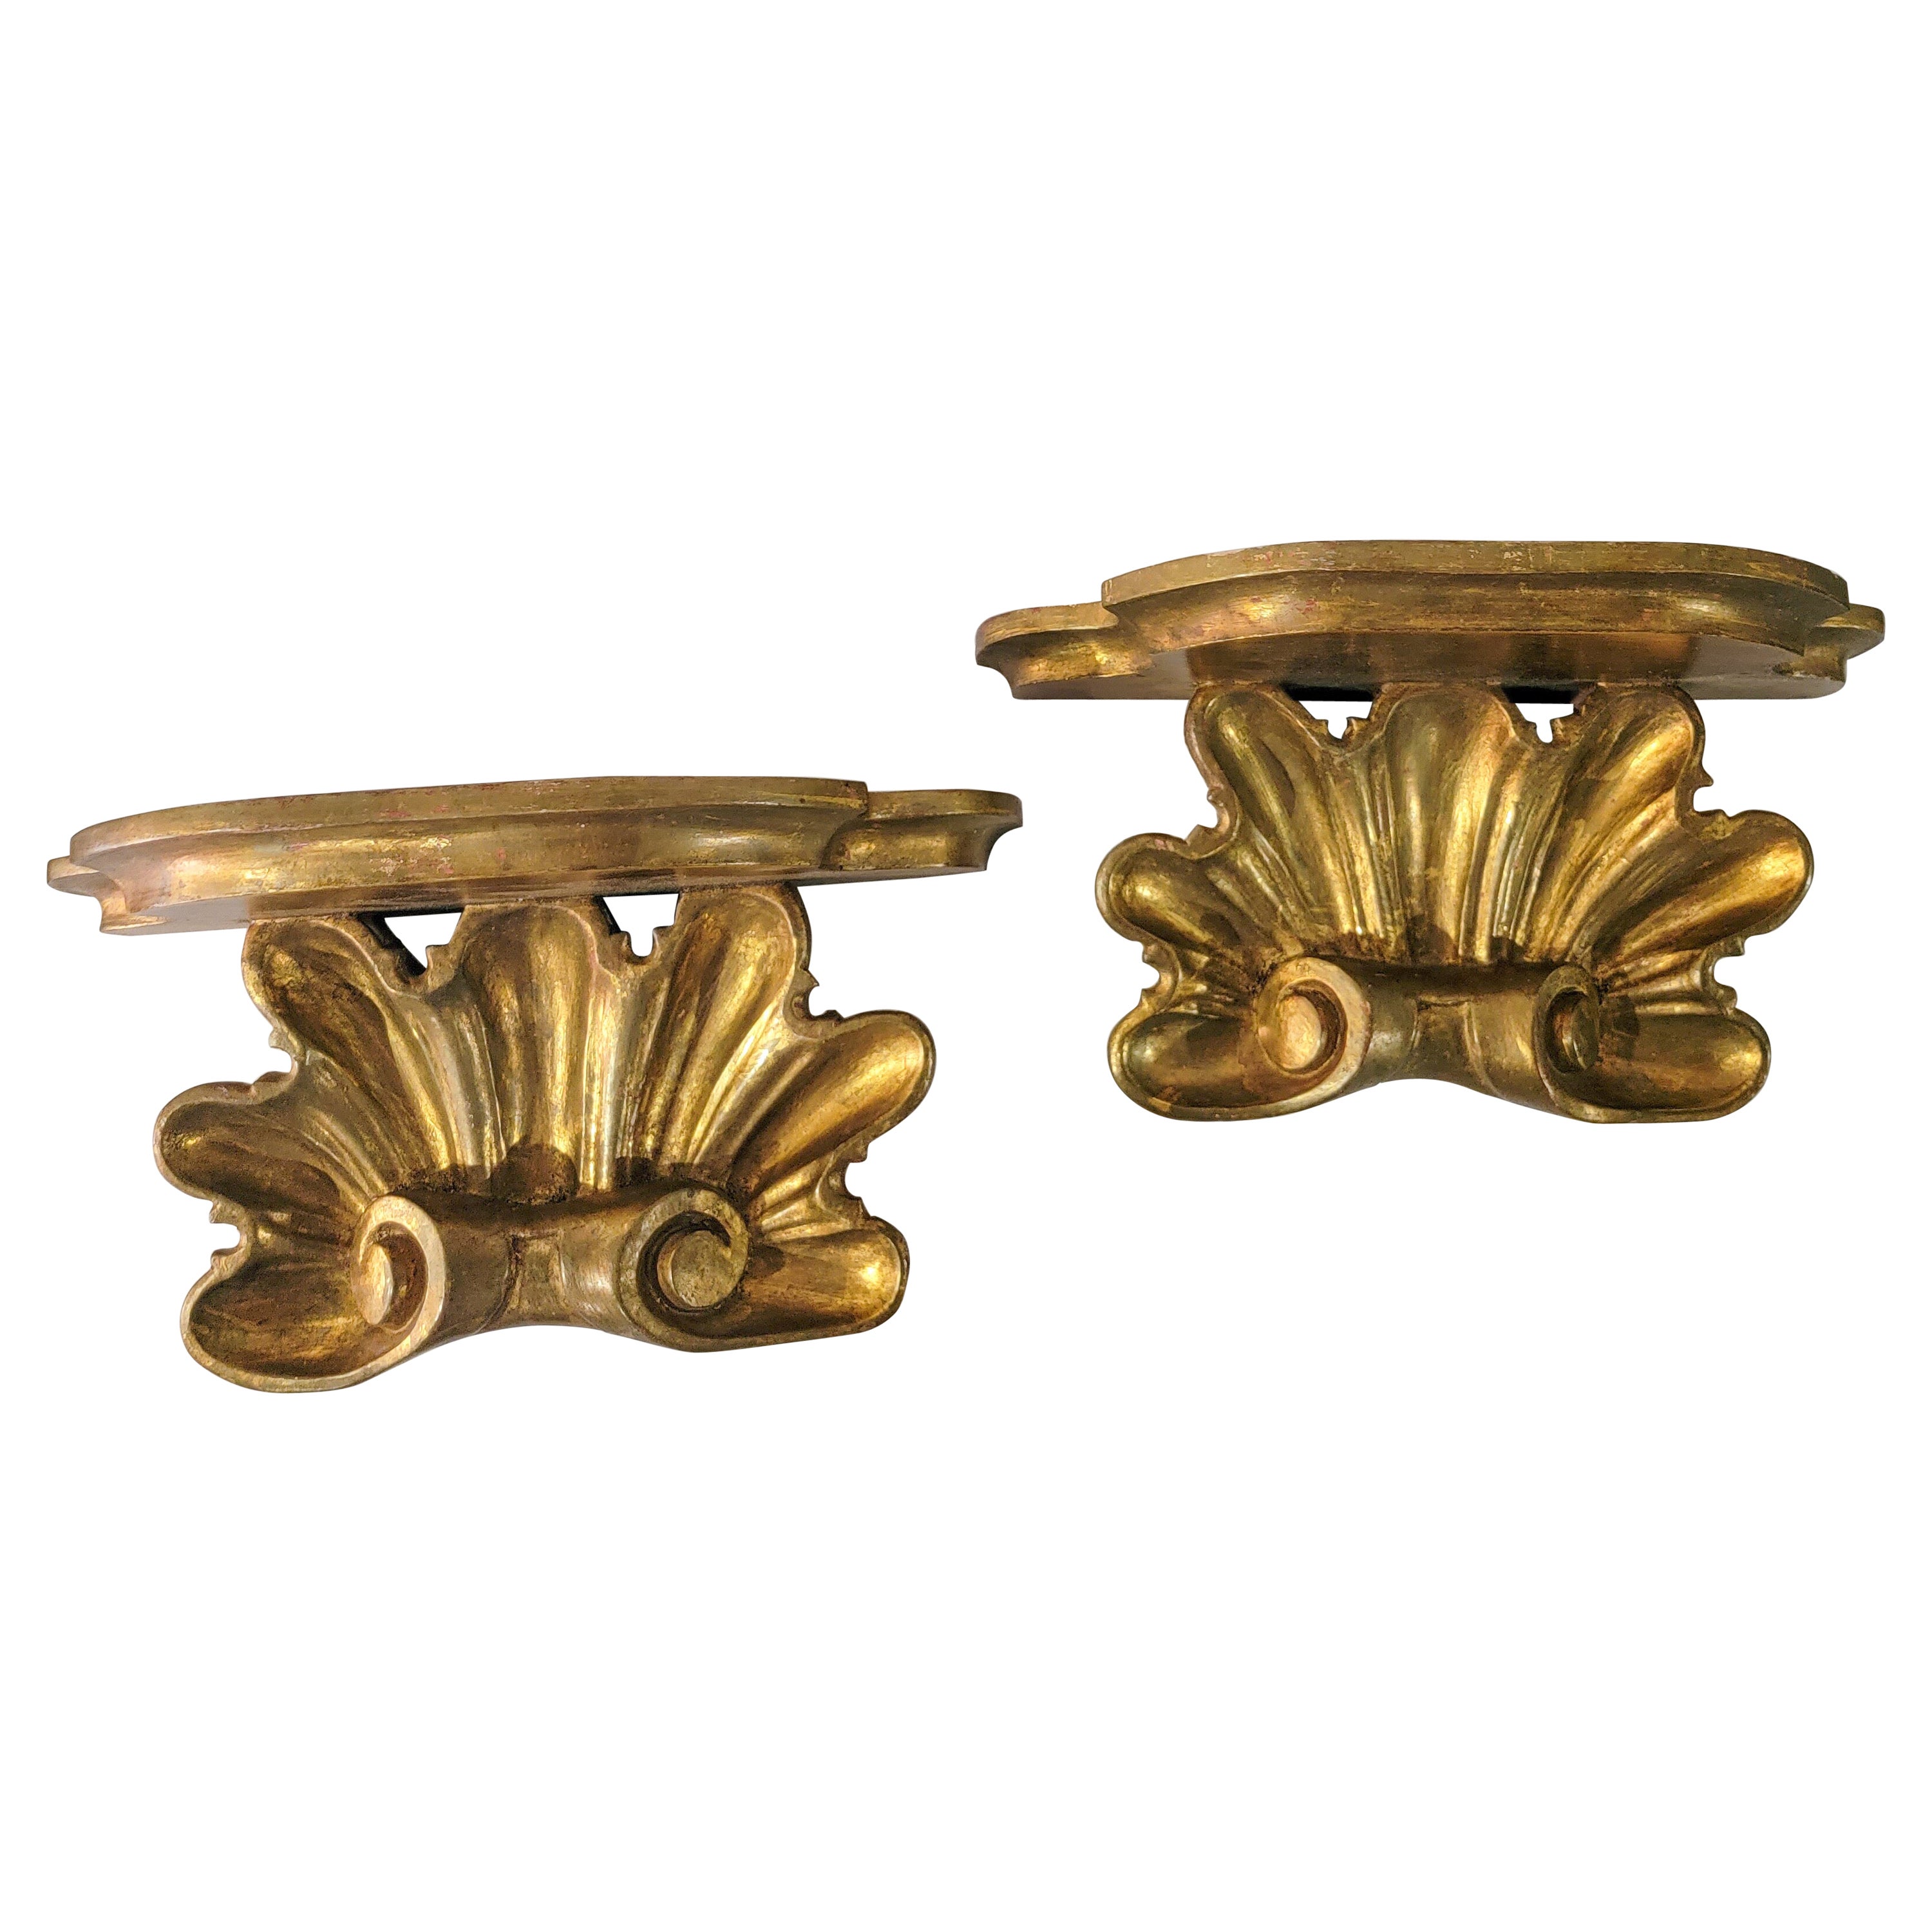 Early 20th-C. Italian Carved Giltwood Rococo Style Shell Form Brackets, Pair For Sale